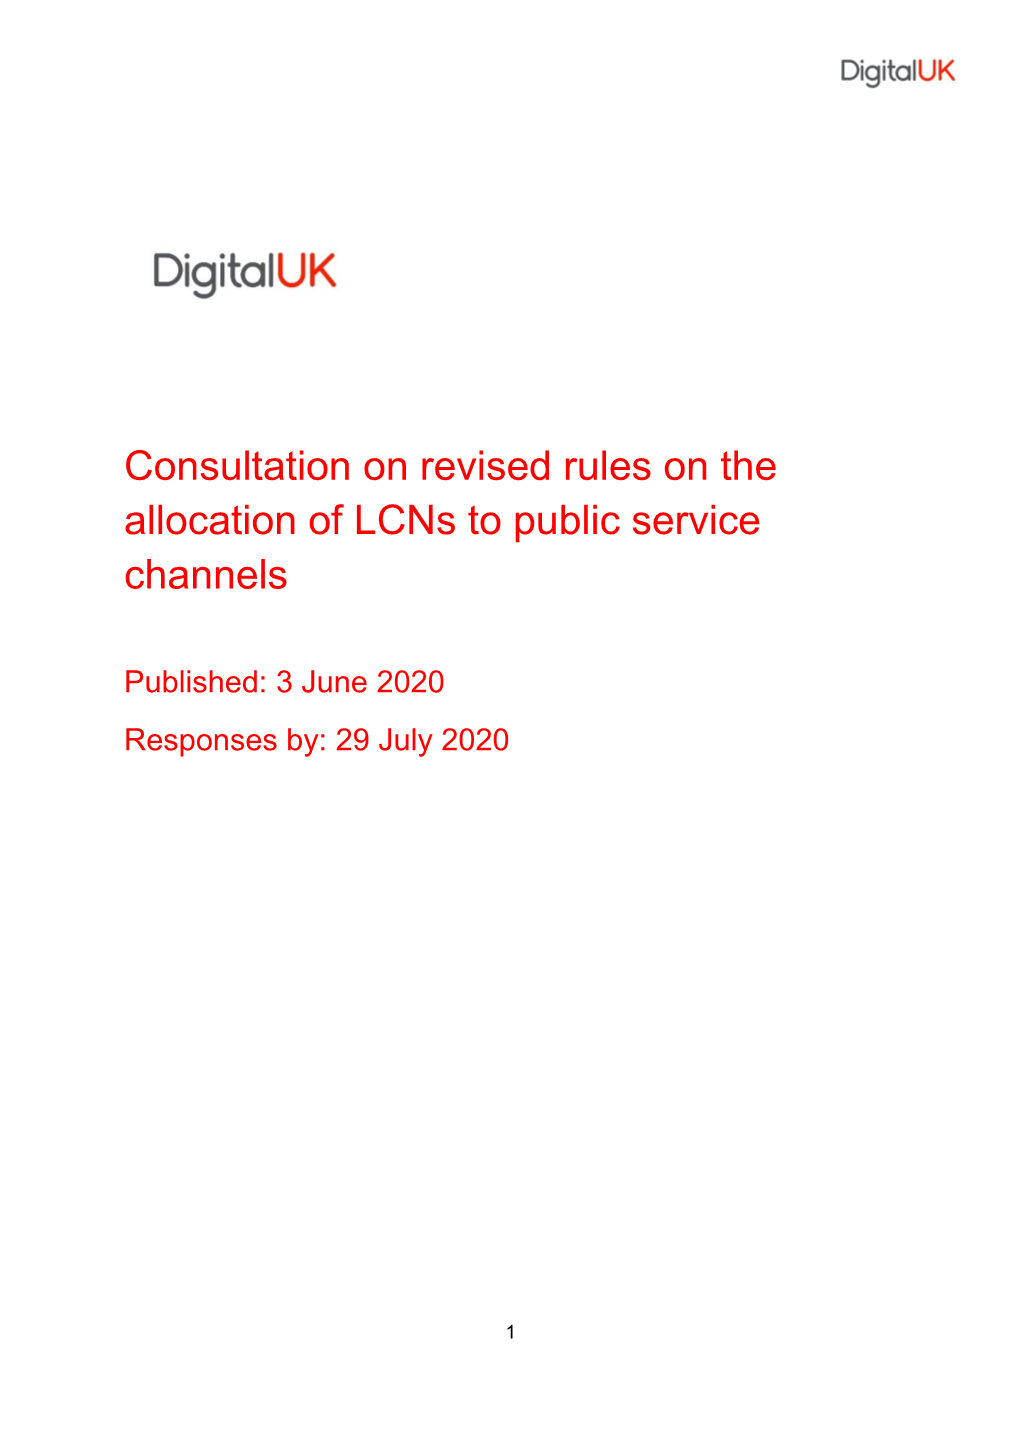 Consultation on Revised Rules on the Allocation of Lcns to Public Service Channels